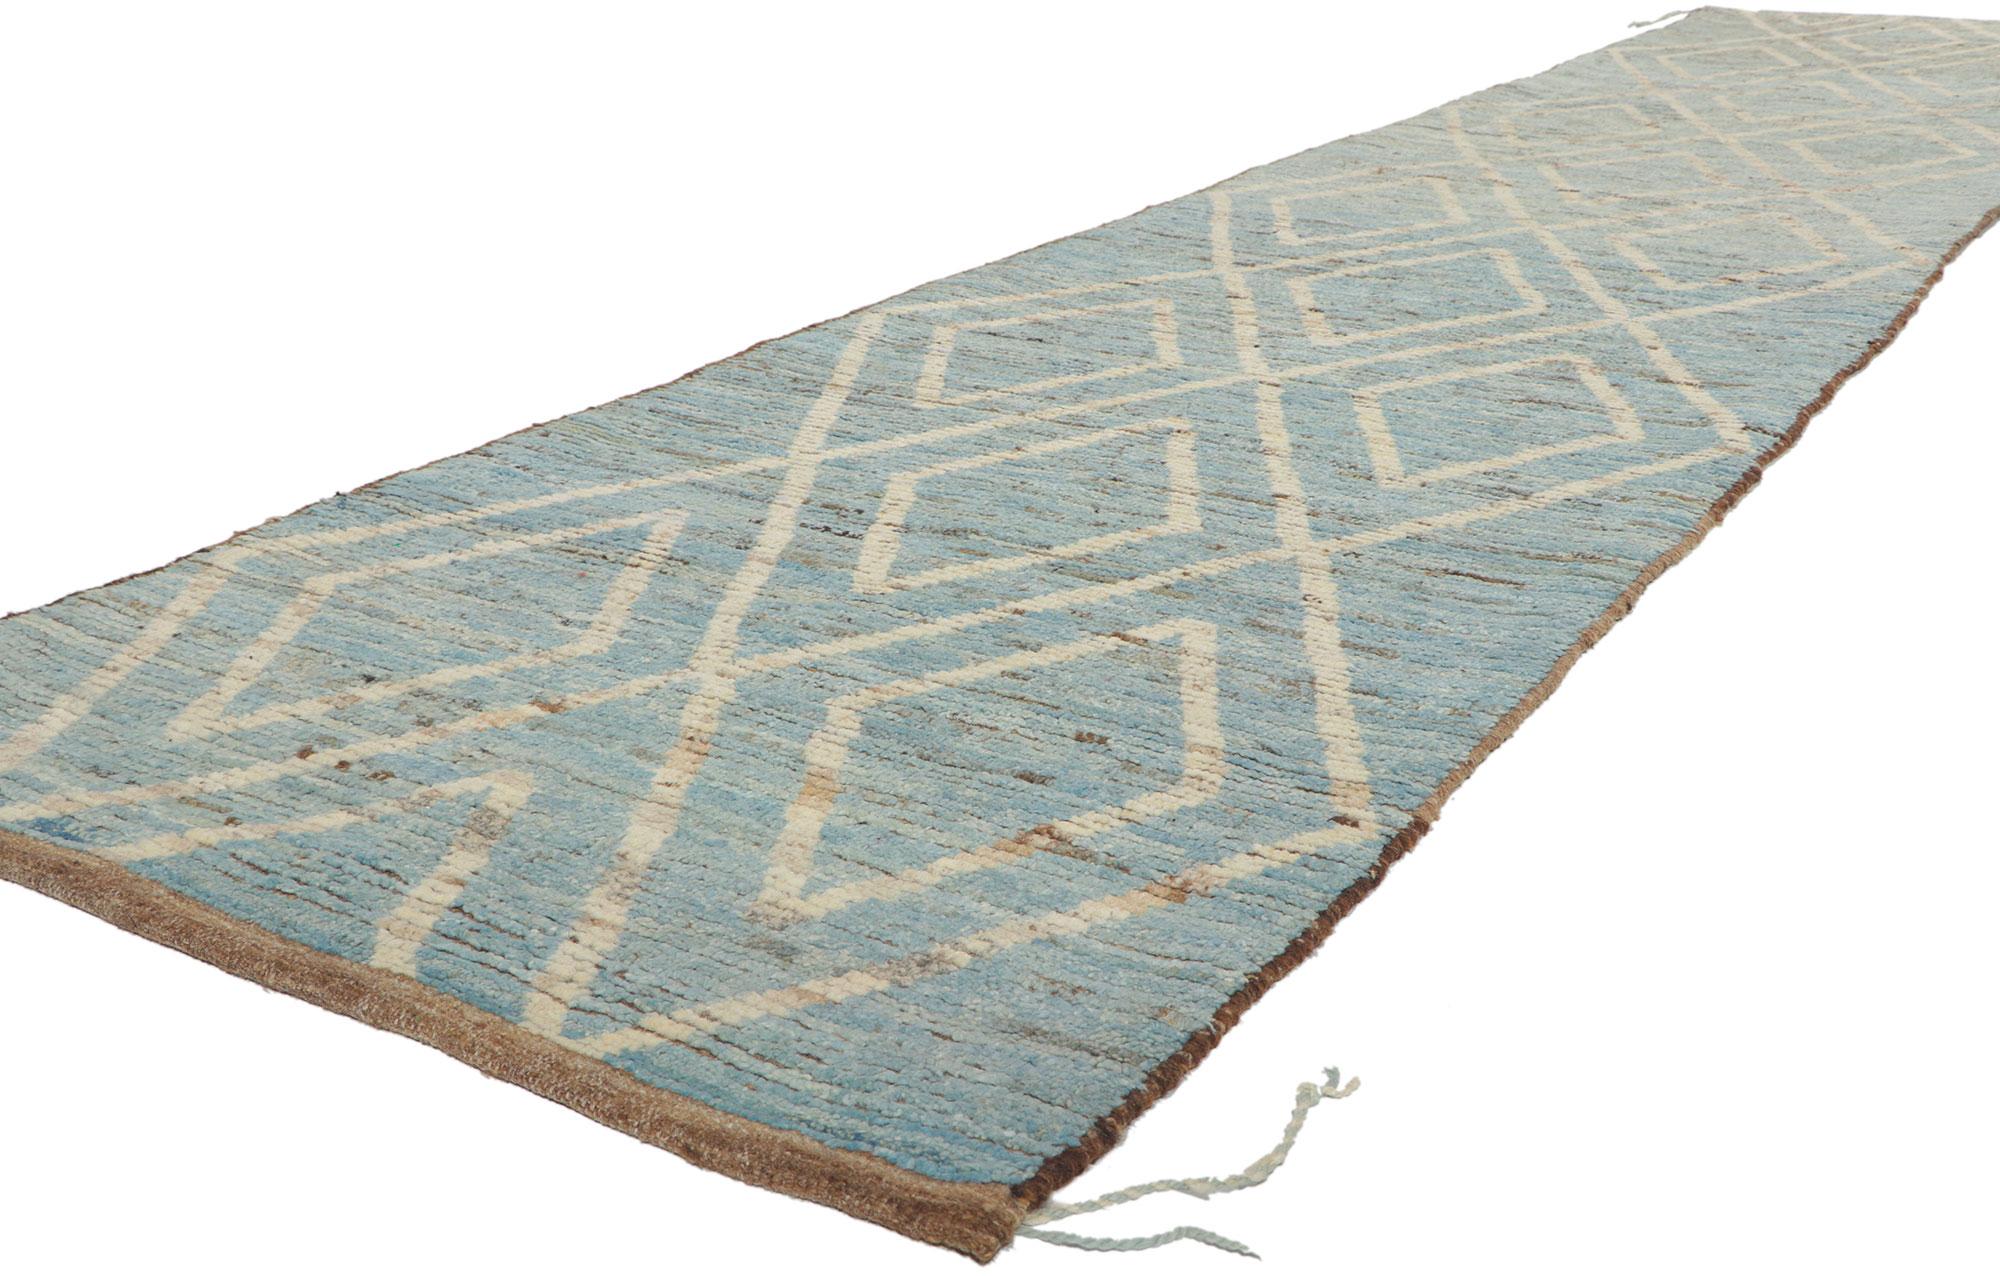 80773 New Contemporary Moroccan Runner, 03'04 x 16'03. With its nomadic charm, incredible detail and texture, this hand knotted wool contemporary Moroccan runner is a captivating vision of woven beauty. The tribal pattern and earthy colorway woven